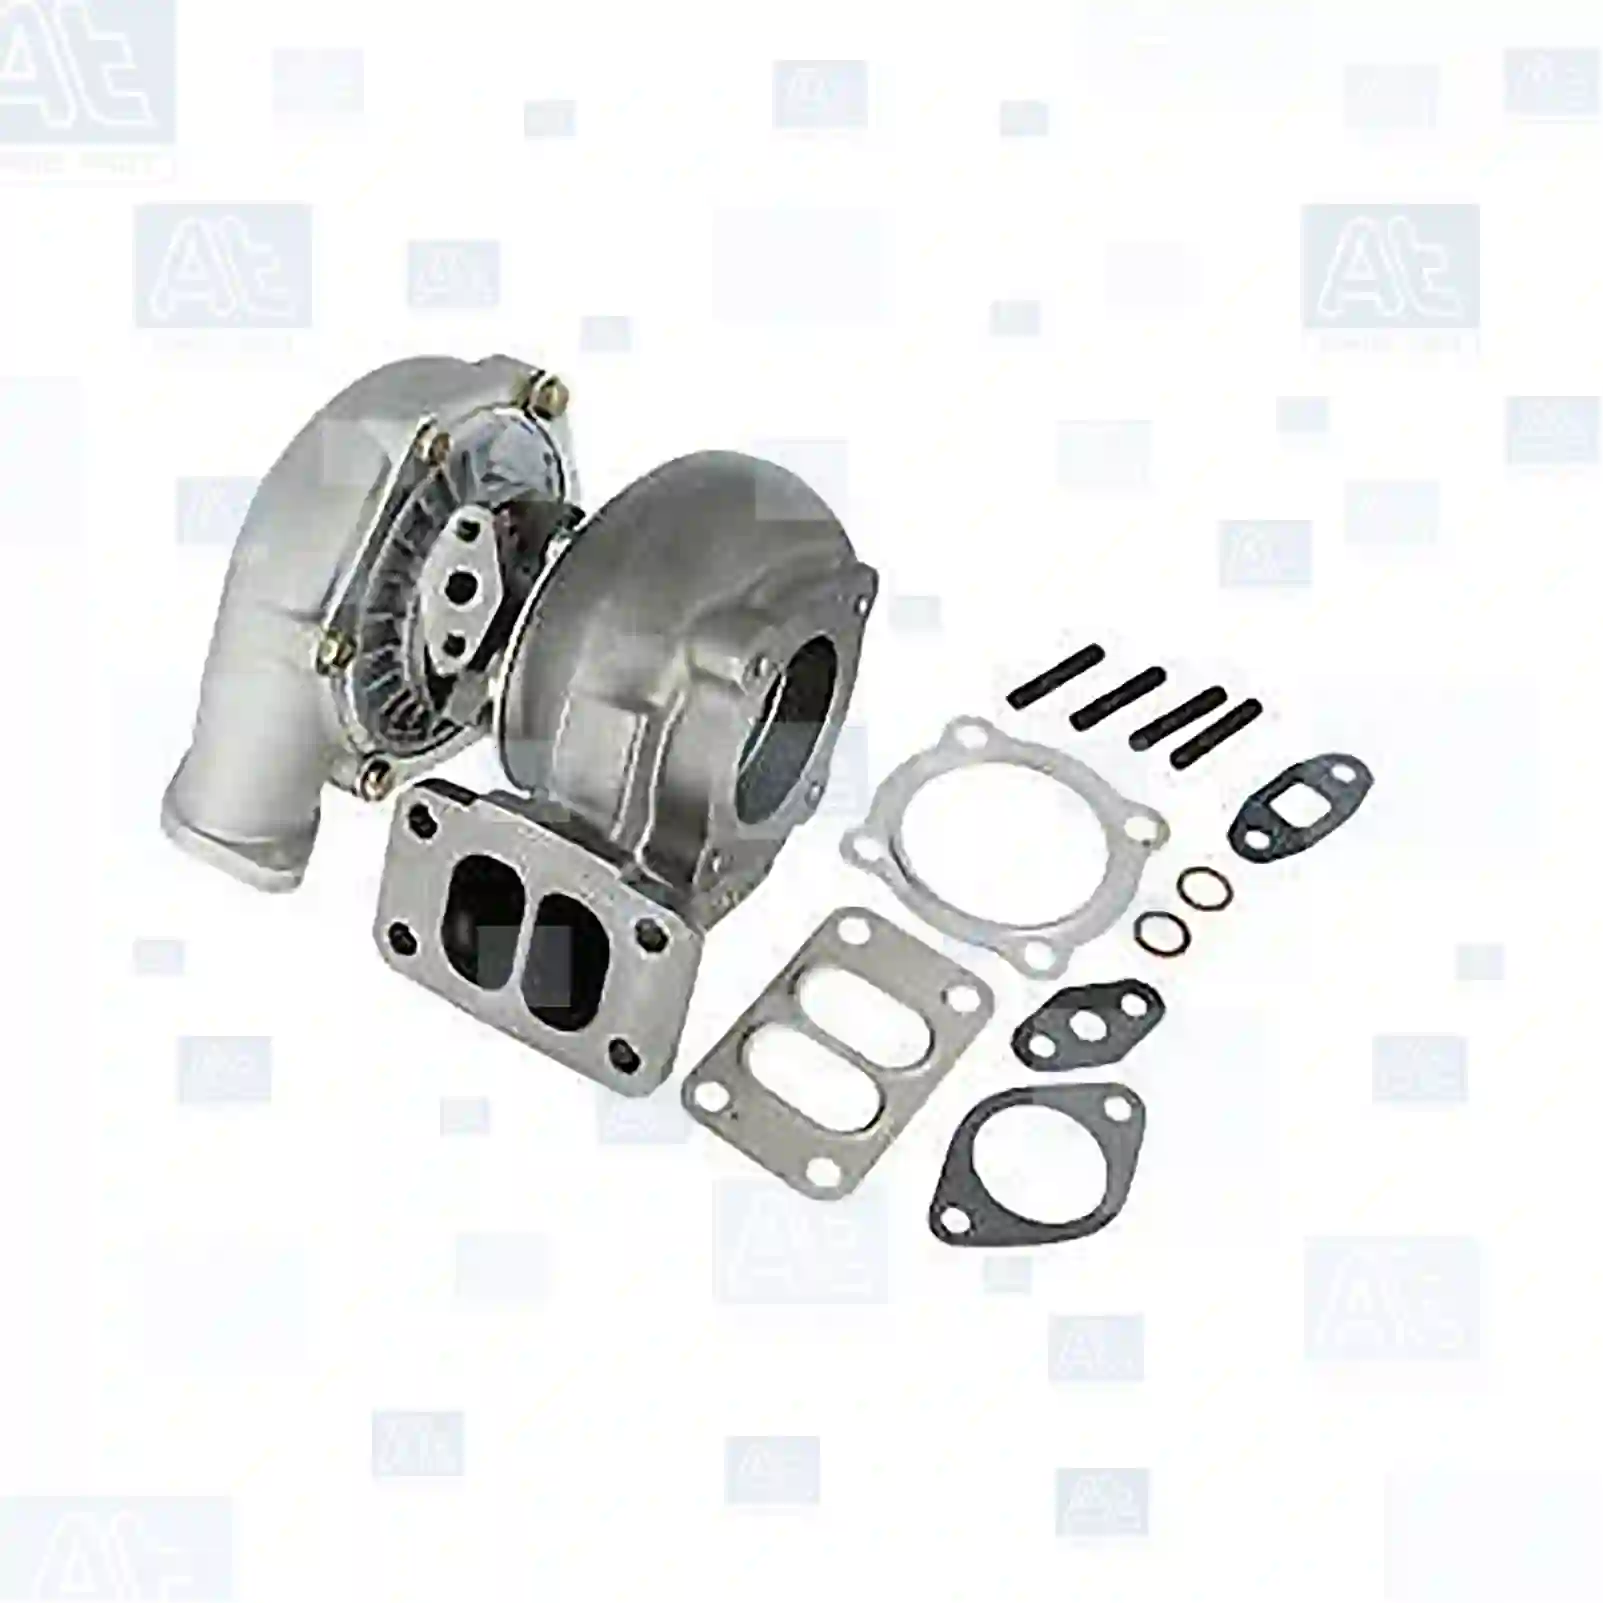 Turbocharger, with gasket kit, at no 77700117, oem no: 3251119699, 3520961599, 3520961699, 3520962199, 3520962399, 3520962599, 3520962699, 3520962799, 3520962999, 3520963099, 3520963199, 3520963299, 3520963399, 3520963499, 3520963599, 3520963699, 3520963799, 3520964499, 3520964599, 3520964699, 3520964799, 3520965499, 3520965599, 3520965699, 3520965799, 3520965899, 3520965999, 3520966099, 3520966199, 3520967199, 352096719980, 3520967299, 3520967399, 3520967499, 3520967799, 3521123599, 3521209599, 3521209699, 3521215799, 3521215899, 3520962526, 3520962527, 3520962529, 3520962530 At Spare Part | Engine, Accelerator Pedal, Camshaft, Connecting Rod, Crankcase, Crankshaft, Cylinder Head, Engine Suspension Mountings, Exhaust Manifold, Exhaust Gas Recirculation, Filter Kits, Flywheel Housing, General Overhaul Kits, Engine, Intake Manifold, Oil Cleaner, Oil Cooler, Oil Filter, Oil Pump, Oil Sump, Piston & Liner, Sensor & Switch, Timing Case, Turbocharger, Cooling System, Belt Tensioner, Coolant Filter, Coolant Pipe, Corrosion Prevention Agent, Drive, Expansion Tank, Fan, Intercooler, Monitors & Gauges, Radiator, Thermostat, V-Belt / Timing belt, Water Pump, Fuel System, Electronical Injector Unit, Feed Pump, Fuel Filter, cpl., Fuel Gauge Sender,  Fuel Line, Fuel Pump, Fuel Tank, Injection Line Kit, Injection Pump, Exhaust System, Clutch & Pedal, Gearbox, Propeller Shaft, Axles, Brake System, Hubs & Wheels, Suspension, Leaf Spring, Universal Parts / Accessories, Steering, Electrical System, Cabin Turbocharger, with gasket kit, at no 77700117, oem no: 3251119699, 3520961599, 3520961699, 3520962199, 3520962399, 3520962599, 3520962699, 3520962799, 3520962999, 3520963099, 3520963199, 3520963299, 3520963399, 3520963499, 3520963599, 3520963699, 3520963799, 3520964499, 3520964599, 3520964699, 3520964799, 3520965499, 3520965599, 3520965699, 3520965799, 3520965899, 3520965999, 3520966099, 3520966199, 3520967199, 352096719980, 3520967299, 3520967399, 3520967499, 3520967799, 3521123599, 3521209599, 3521209699, 3521215799, 3521215899, 3520962526, 3520962527, 3520962529, 3520962530 At Spare Part | Engine, Accelerator Pedal, Camshaft, Connecting Rod, Crankcase, Crankshaft, Cylinder Head, Engine Suspension Mountings, Exhaust Manifold, Exhaust Gas Recirculation, Filter Kits, Flywheel Housing, General Overhaul Kits, Engine, Intake Manifold, Oil Cleaner, Oil Cooler, Oil Filter, Oil Pump, Oil Sump, Piston & Liner, Sensor & Switch, Timing Case, Turbocharger, Cooling System, Belt Tensioner, Coolant Filter, Coolant Pipe, Corrosion Prevention Agent, Drive, Expansion Tank, Fan, Intercooler, Monitors & Gauges, Radiator, Thermostat, V-Belt / Timing belt, Water Pump, Fuel System, Electronical Injector Unit, Feed Pump, Fuel Filter, cpl., Fuel Gauge Sender,  Fuel Line, Fuel Pump, Fuel Tank, Injection Line Kit, Injection Pump, Exhaust System, Clutch & Pedal, Gearbox, Propeller Shaft, Axles, Brake System, Hubs & Wheels, Suspension, Leaf Spring, Universal Parts / Accessories, Steering, Electrical System, Cabin